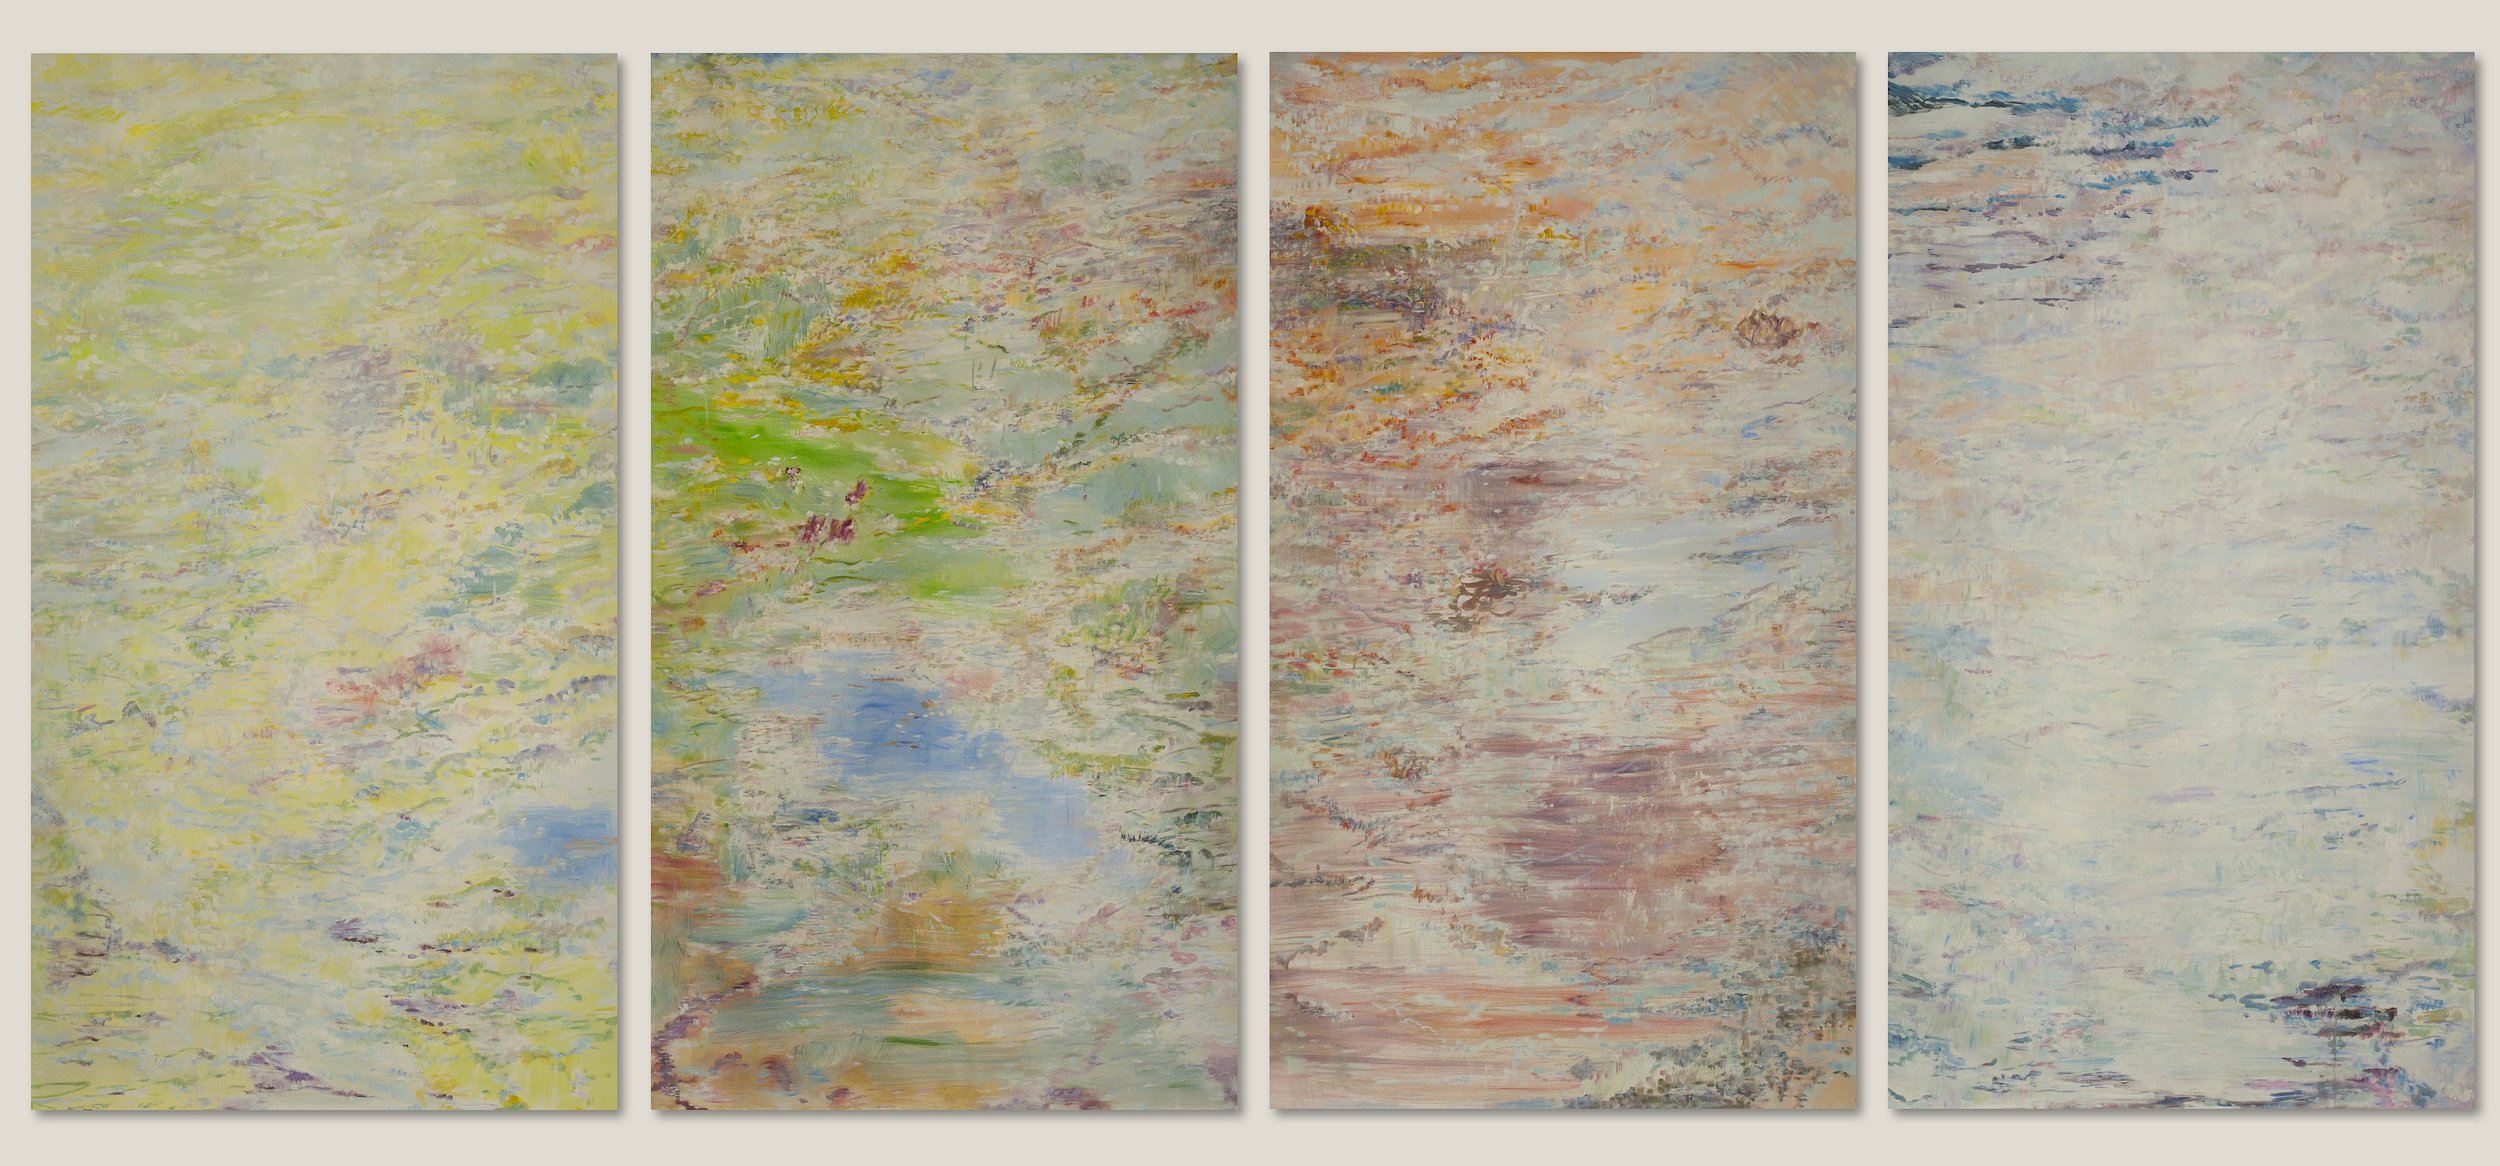 The Seasons, Large Scale Abstract Oil Paintings 2014